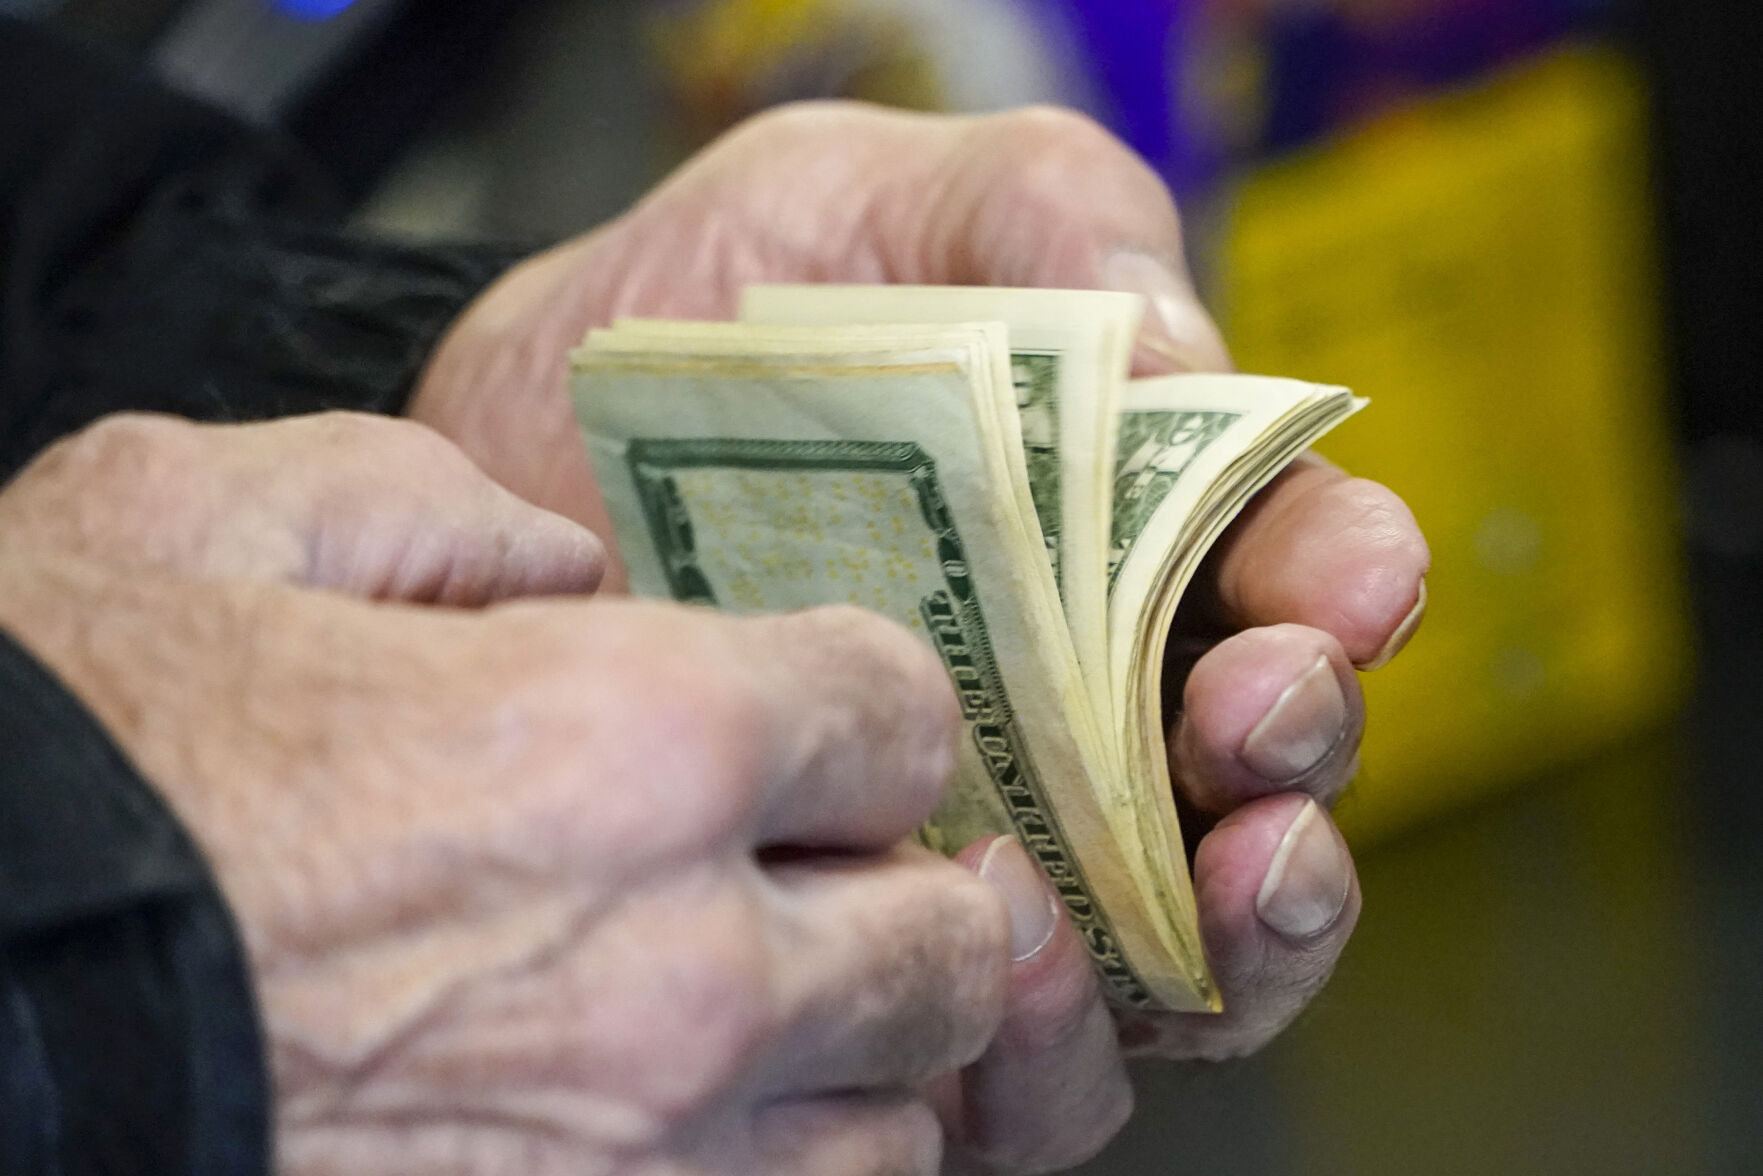 <p>A customer thumbs through his money as he buys tickets for the Monday Powerball drawing with an annuity value of at least $1.9 billion, Monday, Nov. 7, 2022, at a convenience store in Renfrew, Pa. (AP Photo/Keith Srakocic)</p>   PHOTO CREDIT: Keith Srakocic - staff, AP